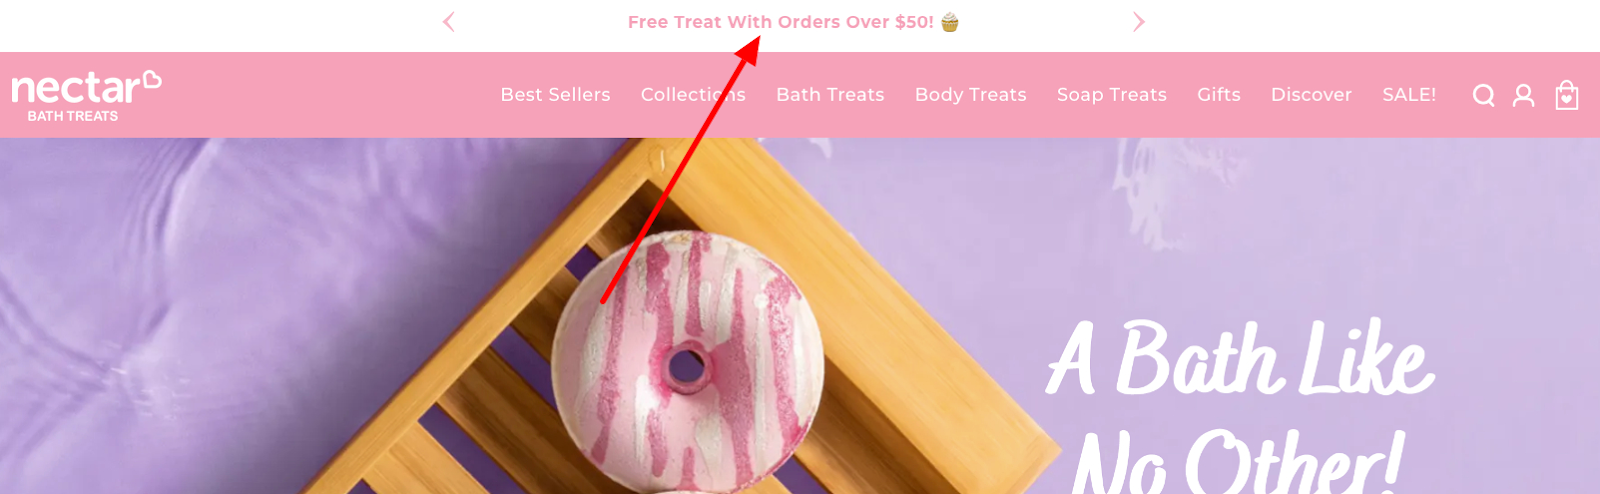 nectar bath treats free gift with purchase banner